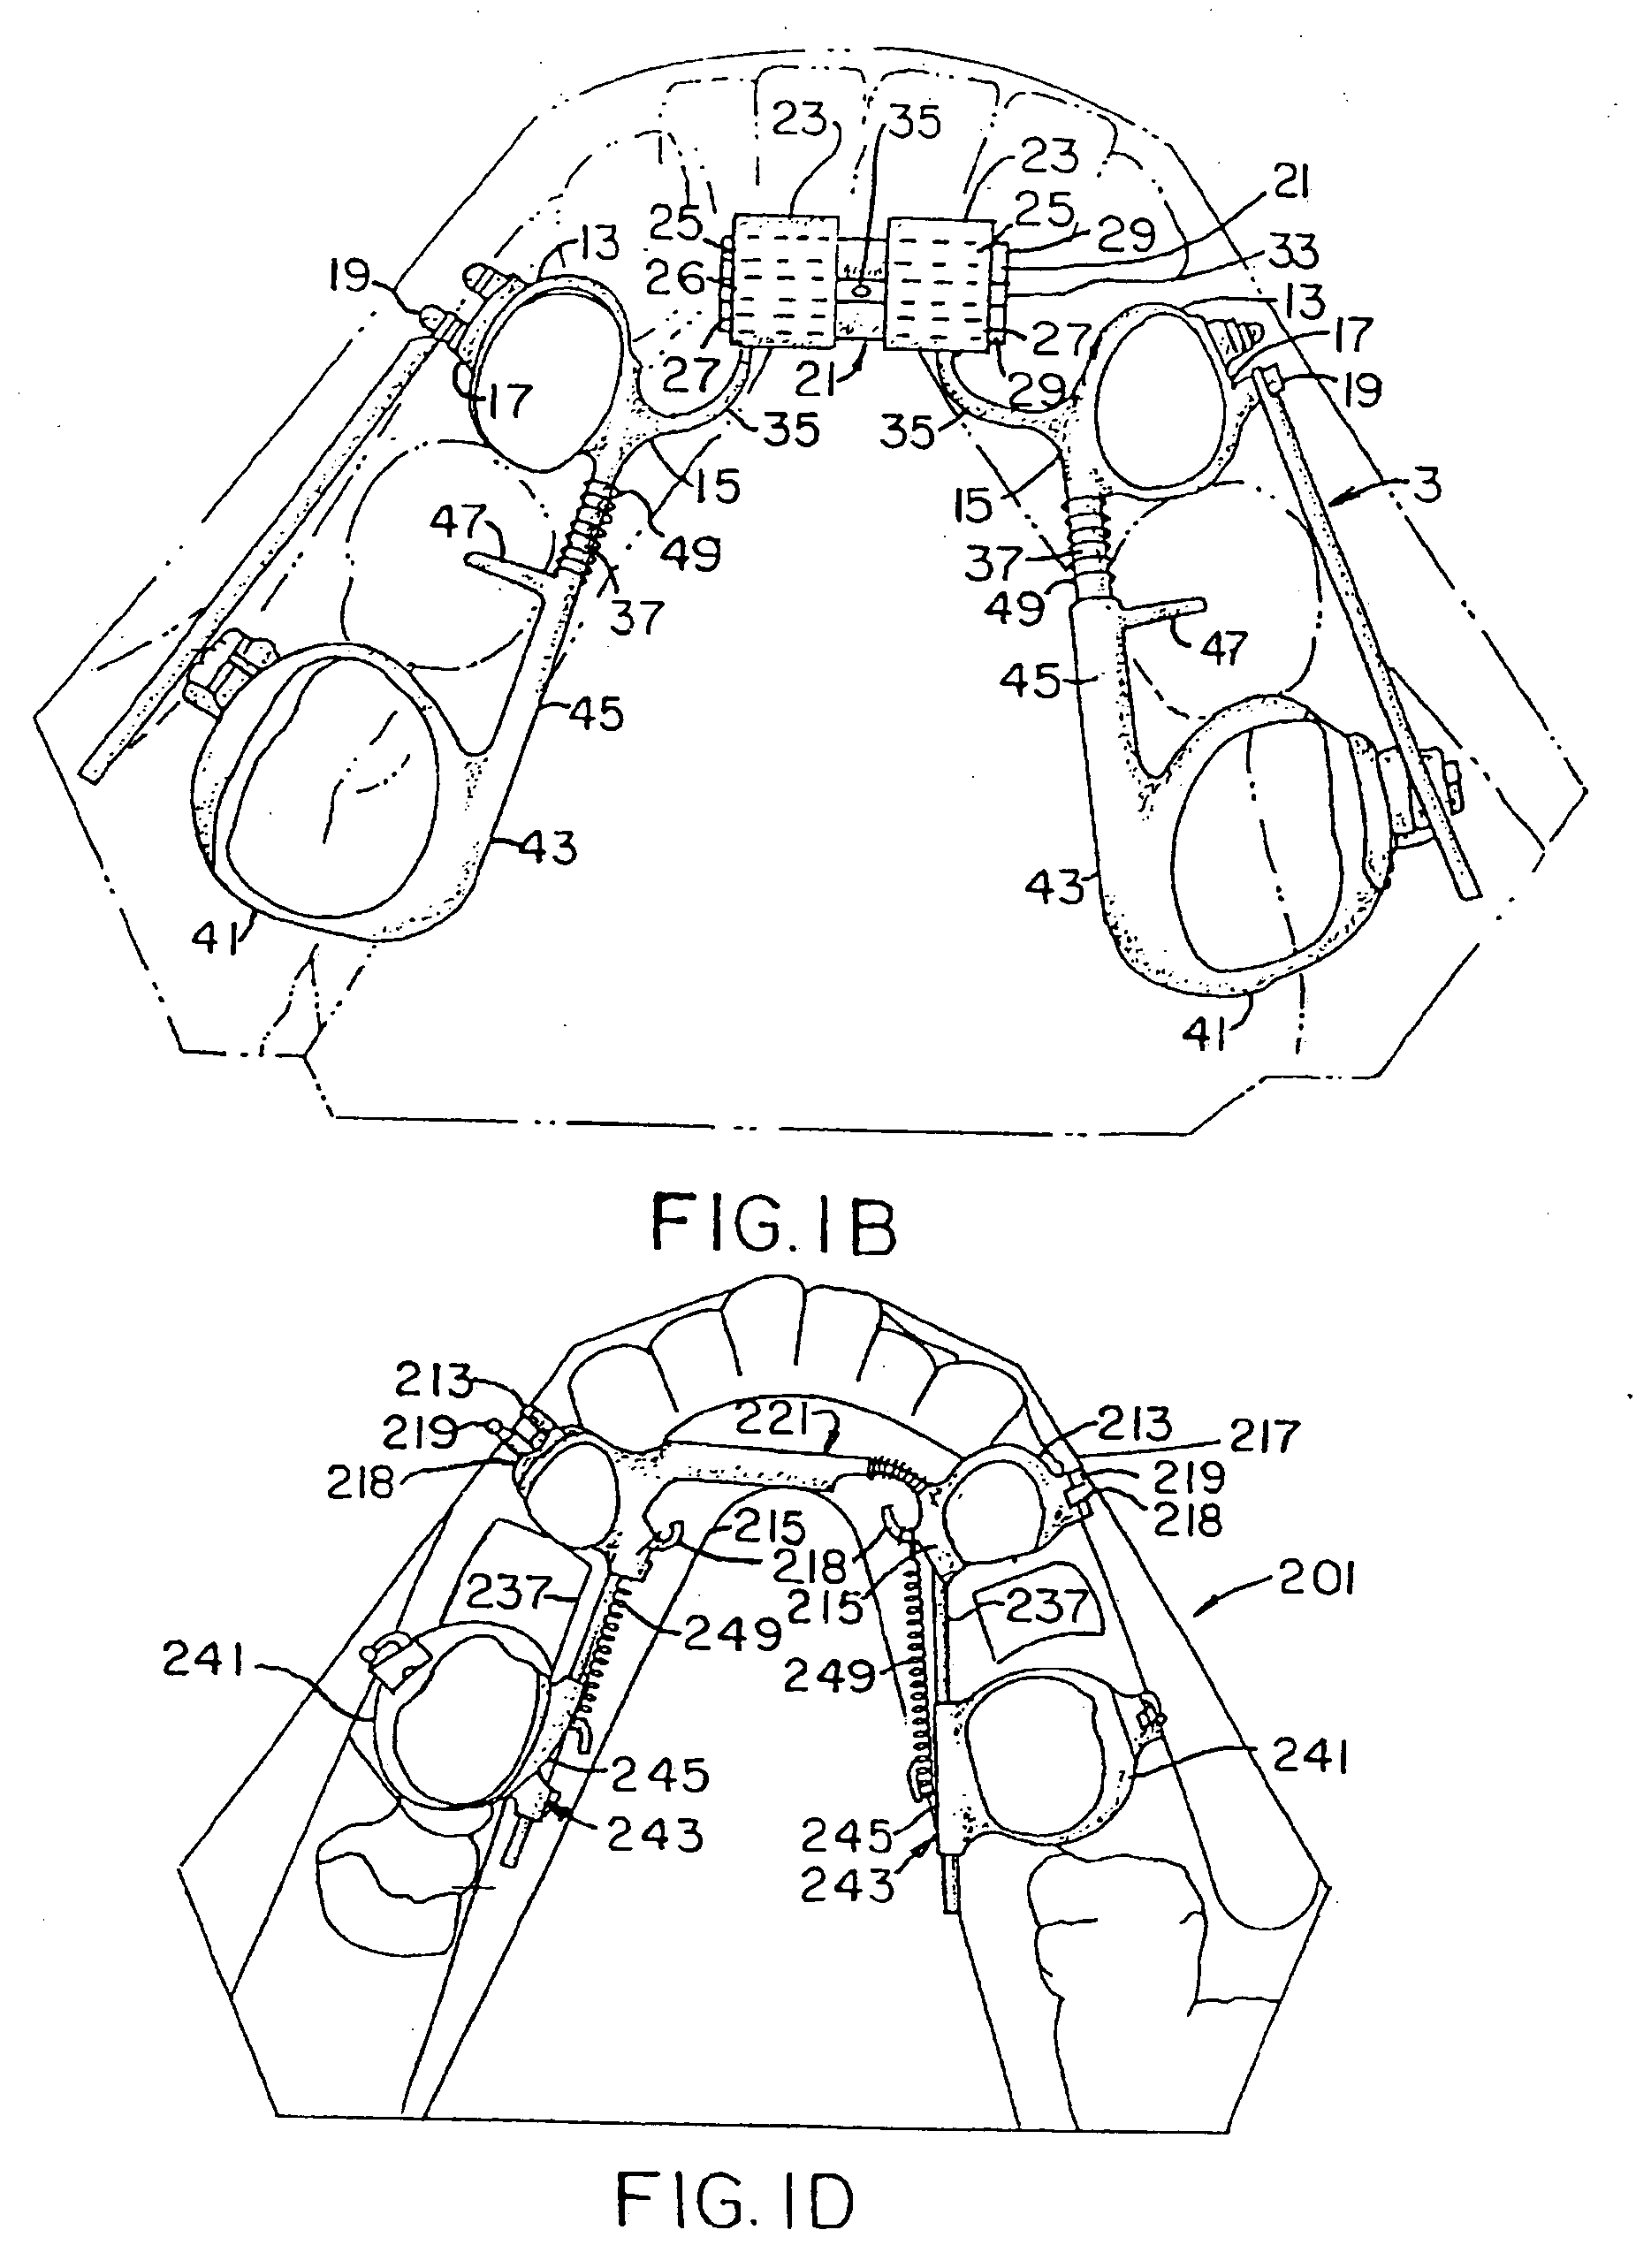 Slide on connector for arch wire